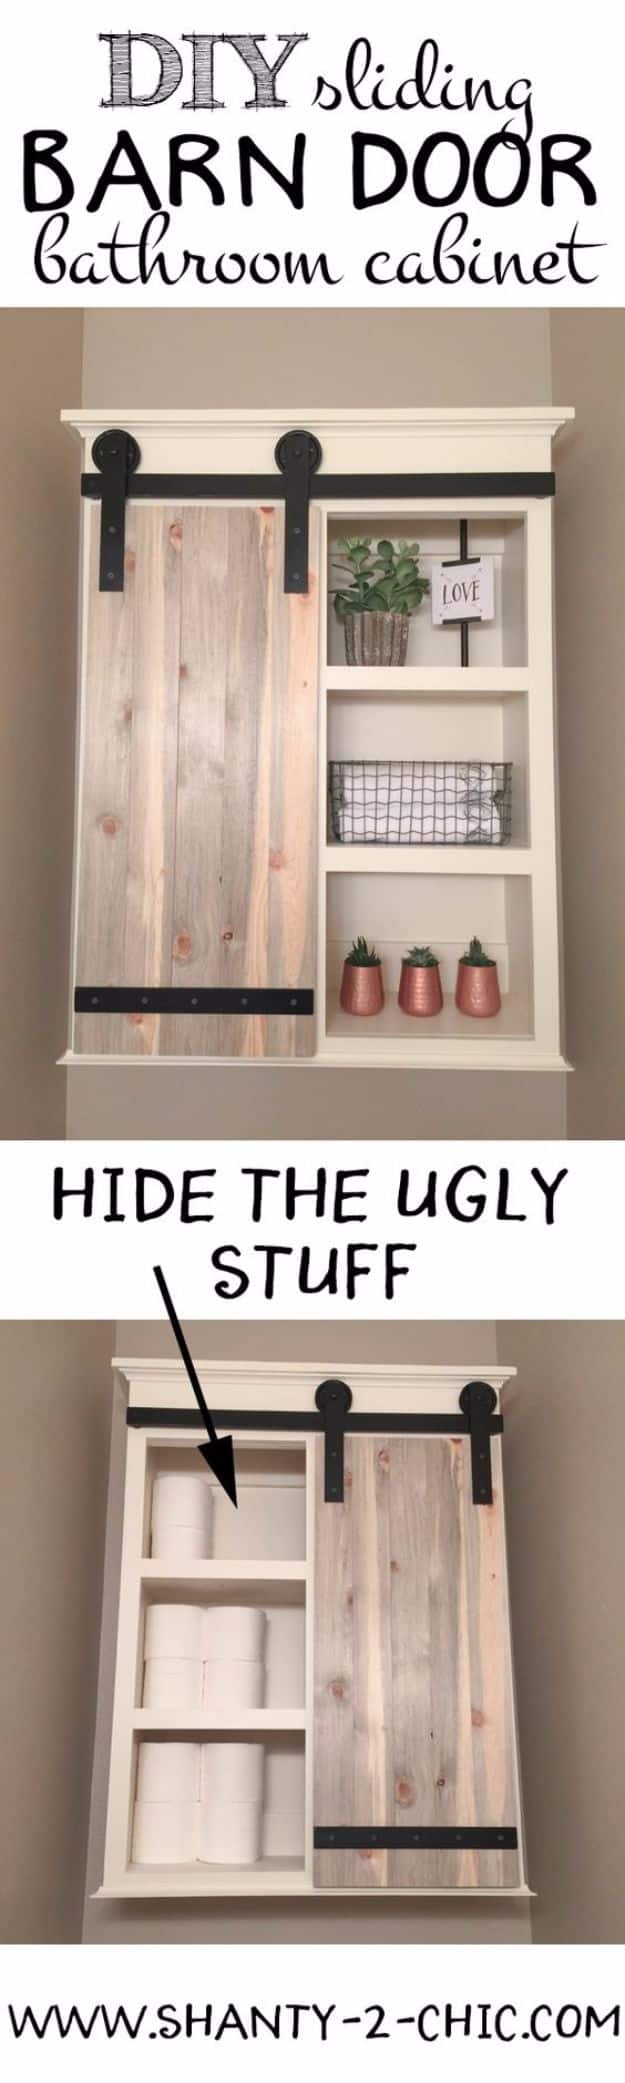 DIY Bathroom Storage Ideas - DIY Sliding Barn Door Bathroom Cabinet - Best Solutions for Under Sink Organization, Countertop Jars and Boxes, Counter Caddy With Mason Jars, Over Toilet Ideas and Shelves, Easy Tips and Tricks for Small Spaces To Organize Bath Products #storageideas #diybathroom #bathroomdecor